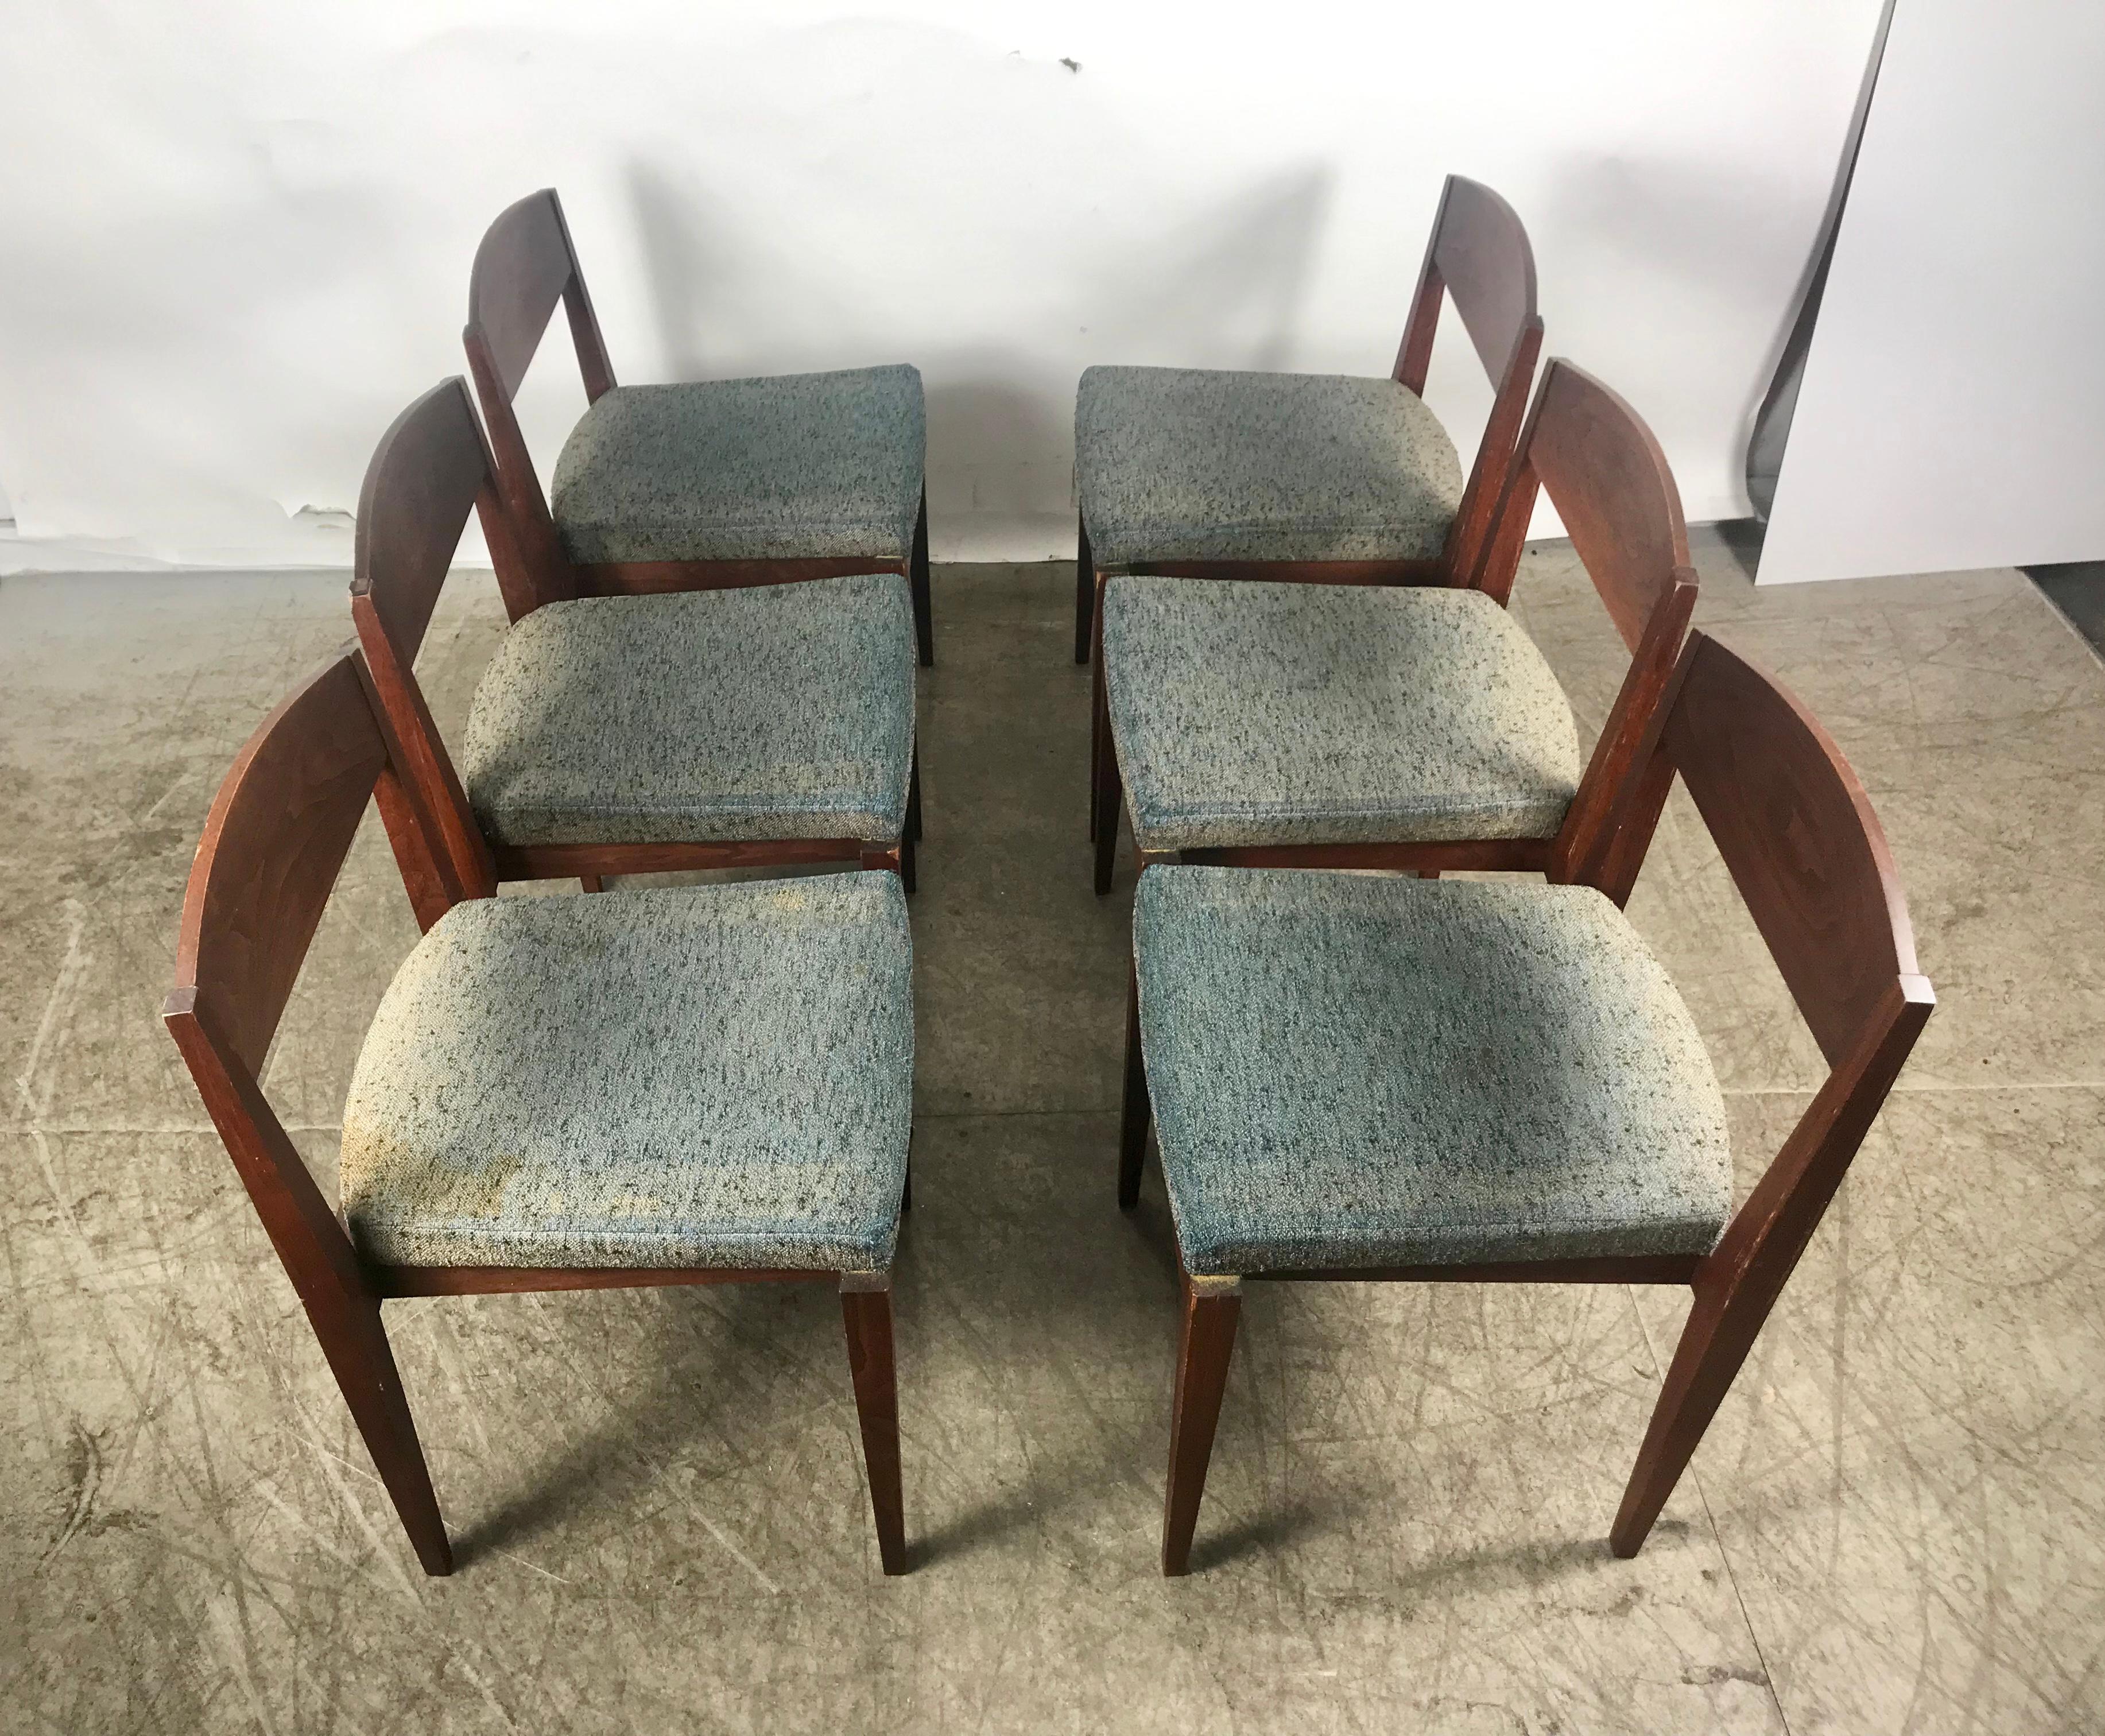 Unusual Set of 6 American Modernist Dining Chairs, Architectural Design In Good Condition For Sale In Buffalo, NY